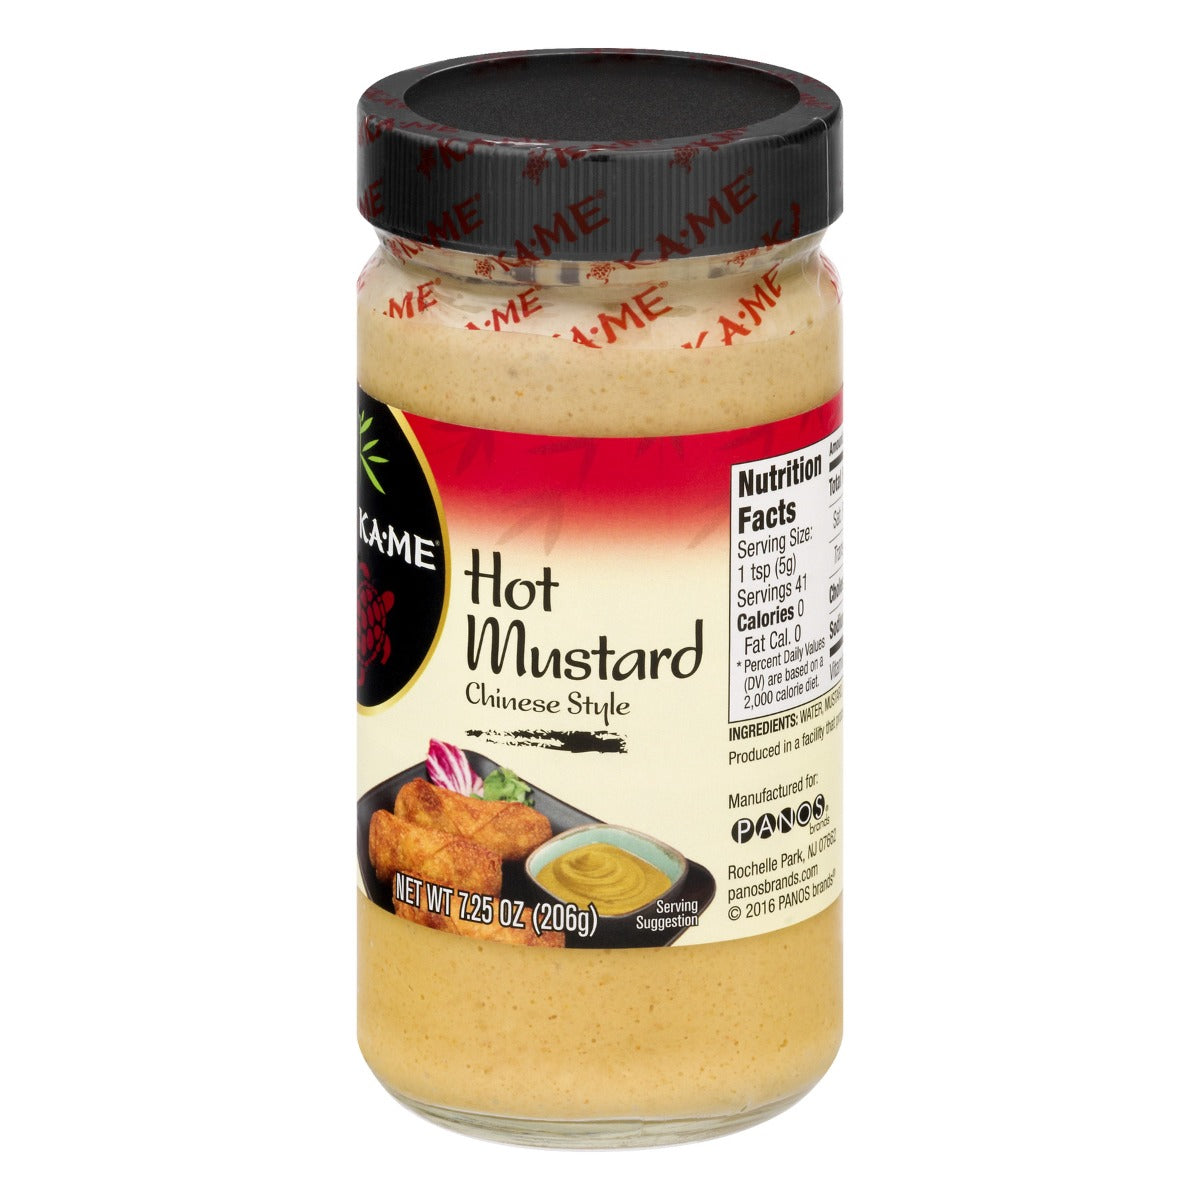 KA ME: Mustard Hot Chinese Style, 7.25 oz - Vending Business Solutions